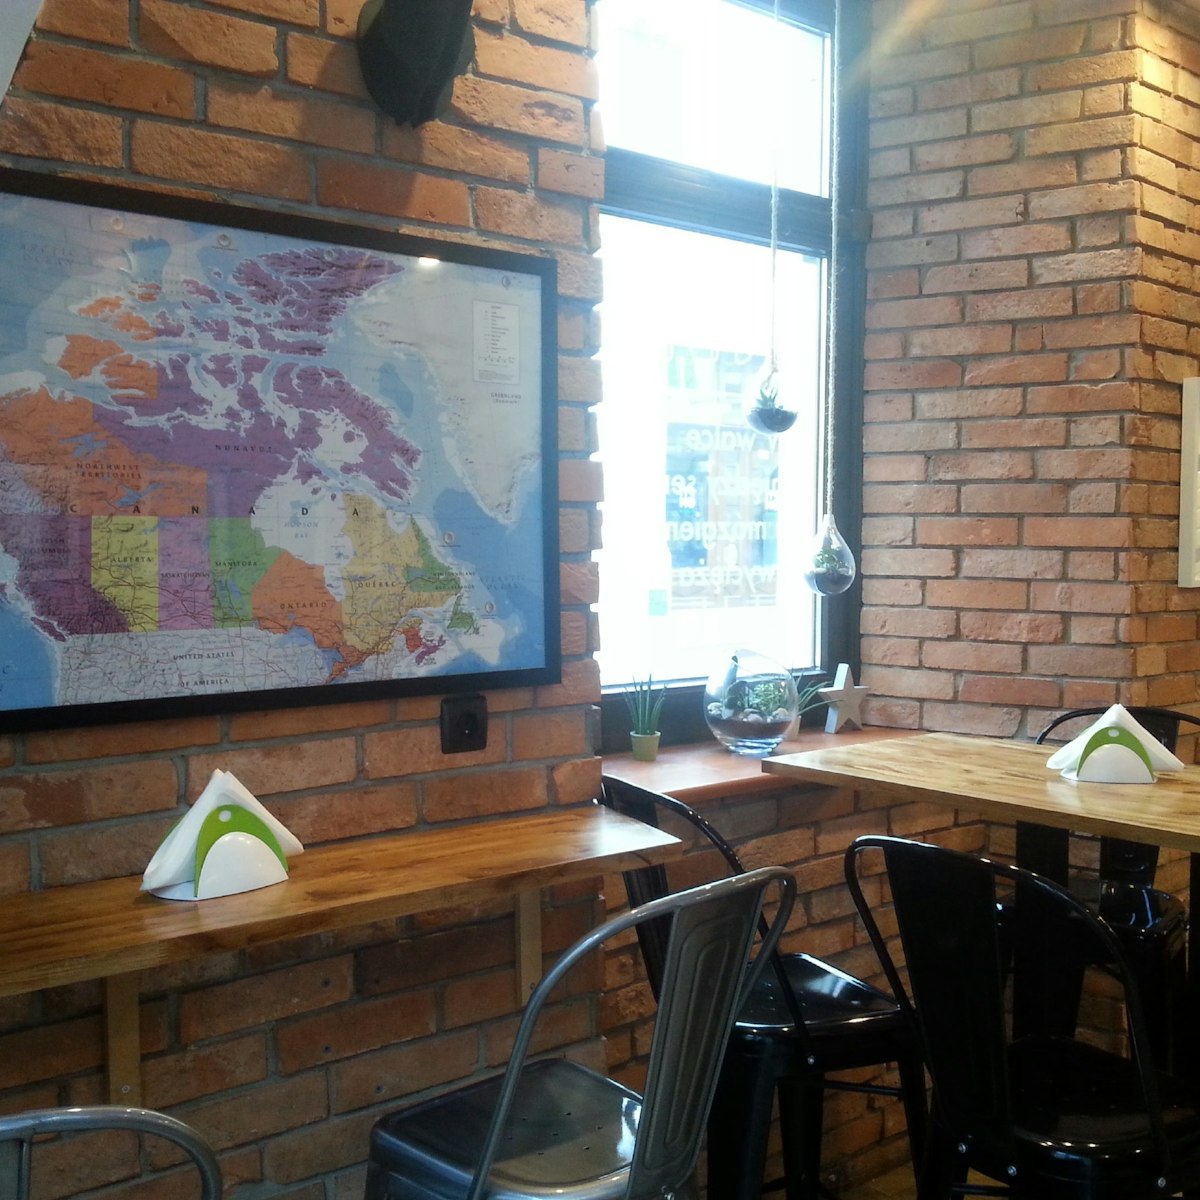 Antler Poutine&Burger, the modest eatery has a Canadian theme with maps and antler decor